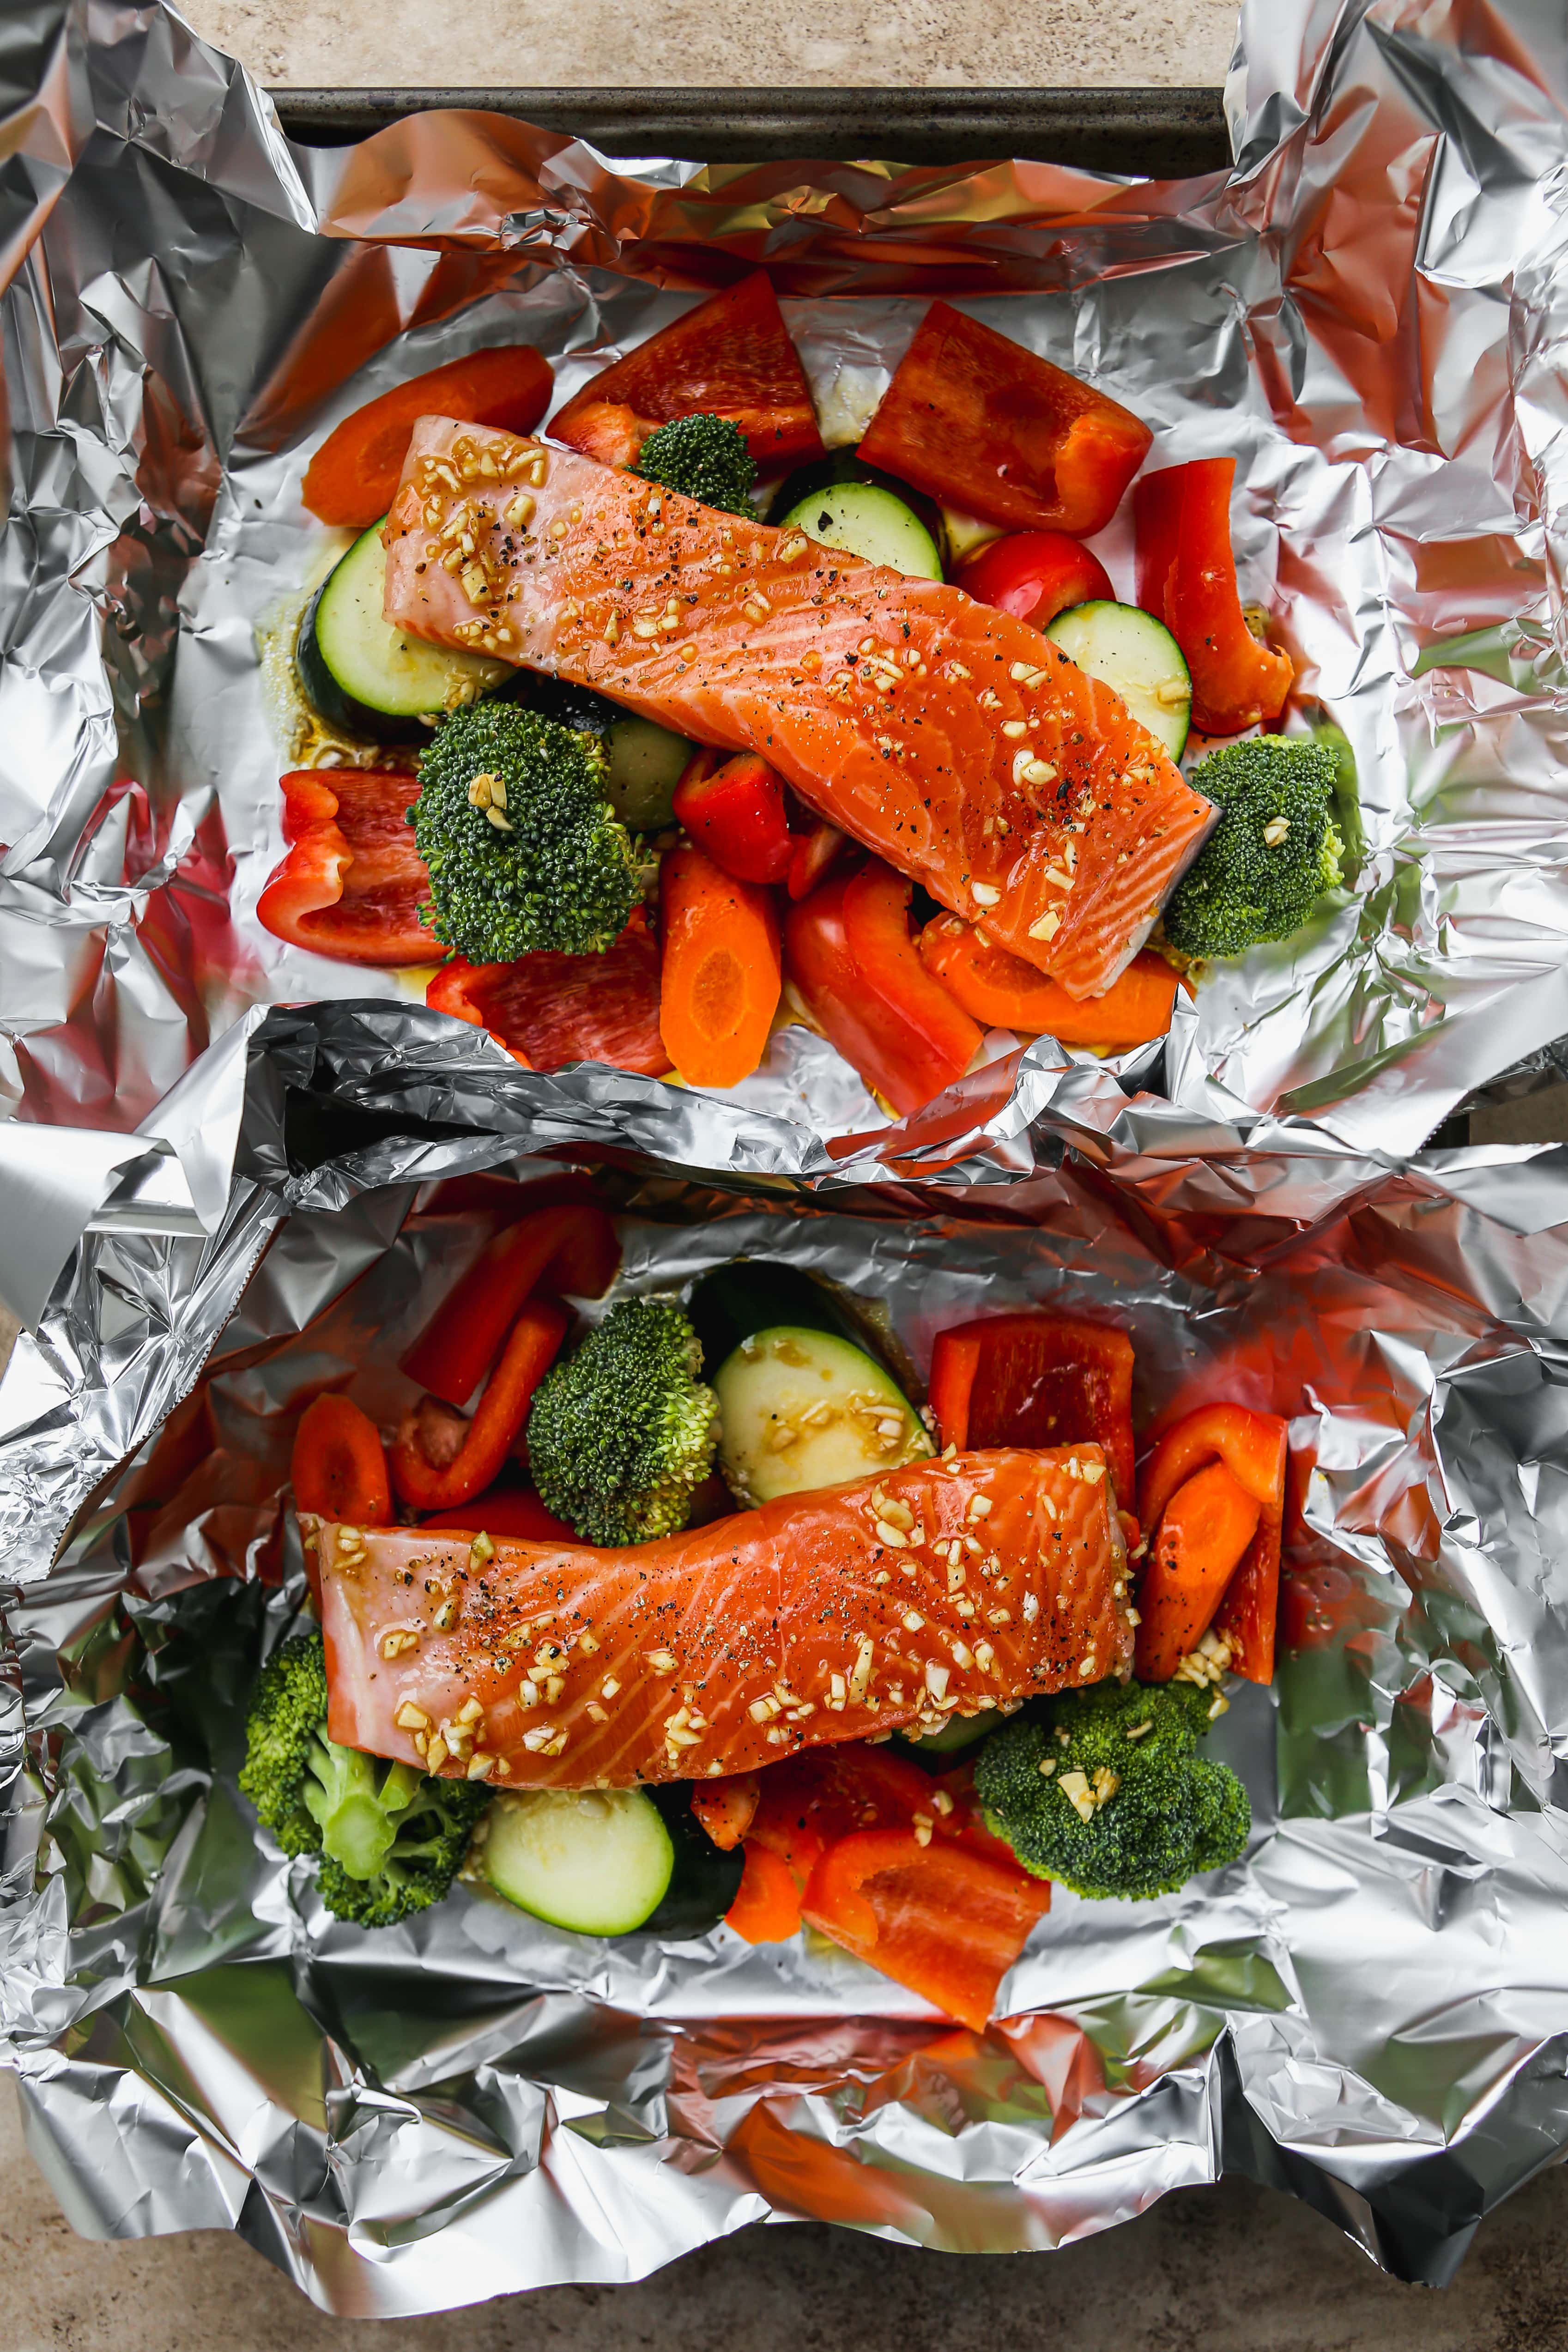 Uncooked salmon on top of vegetables in foil.